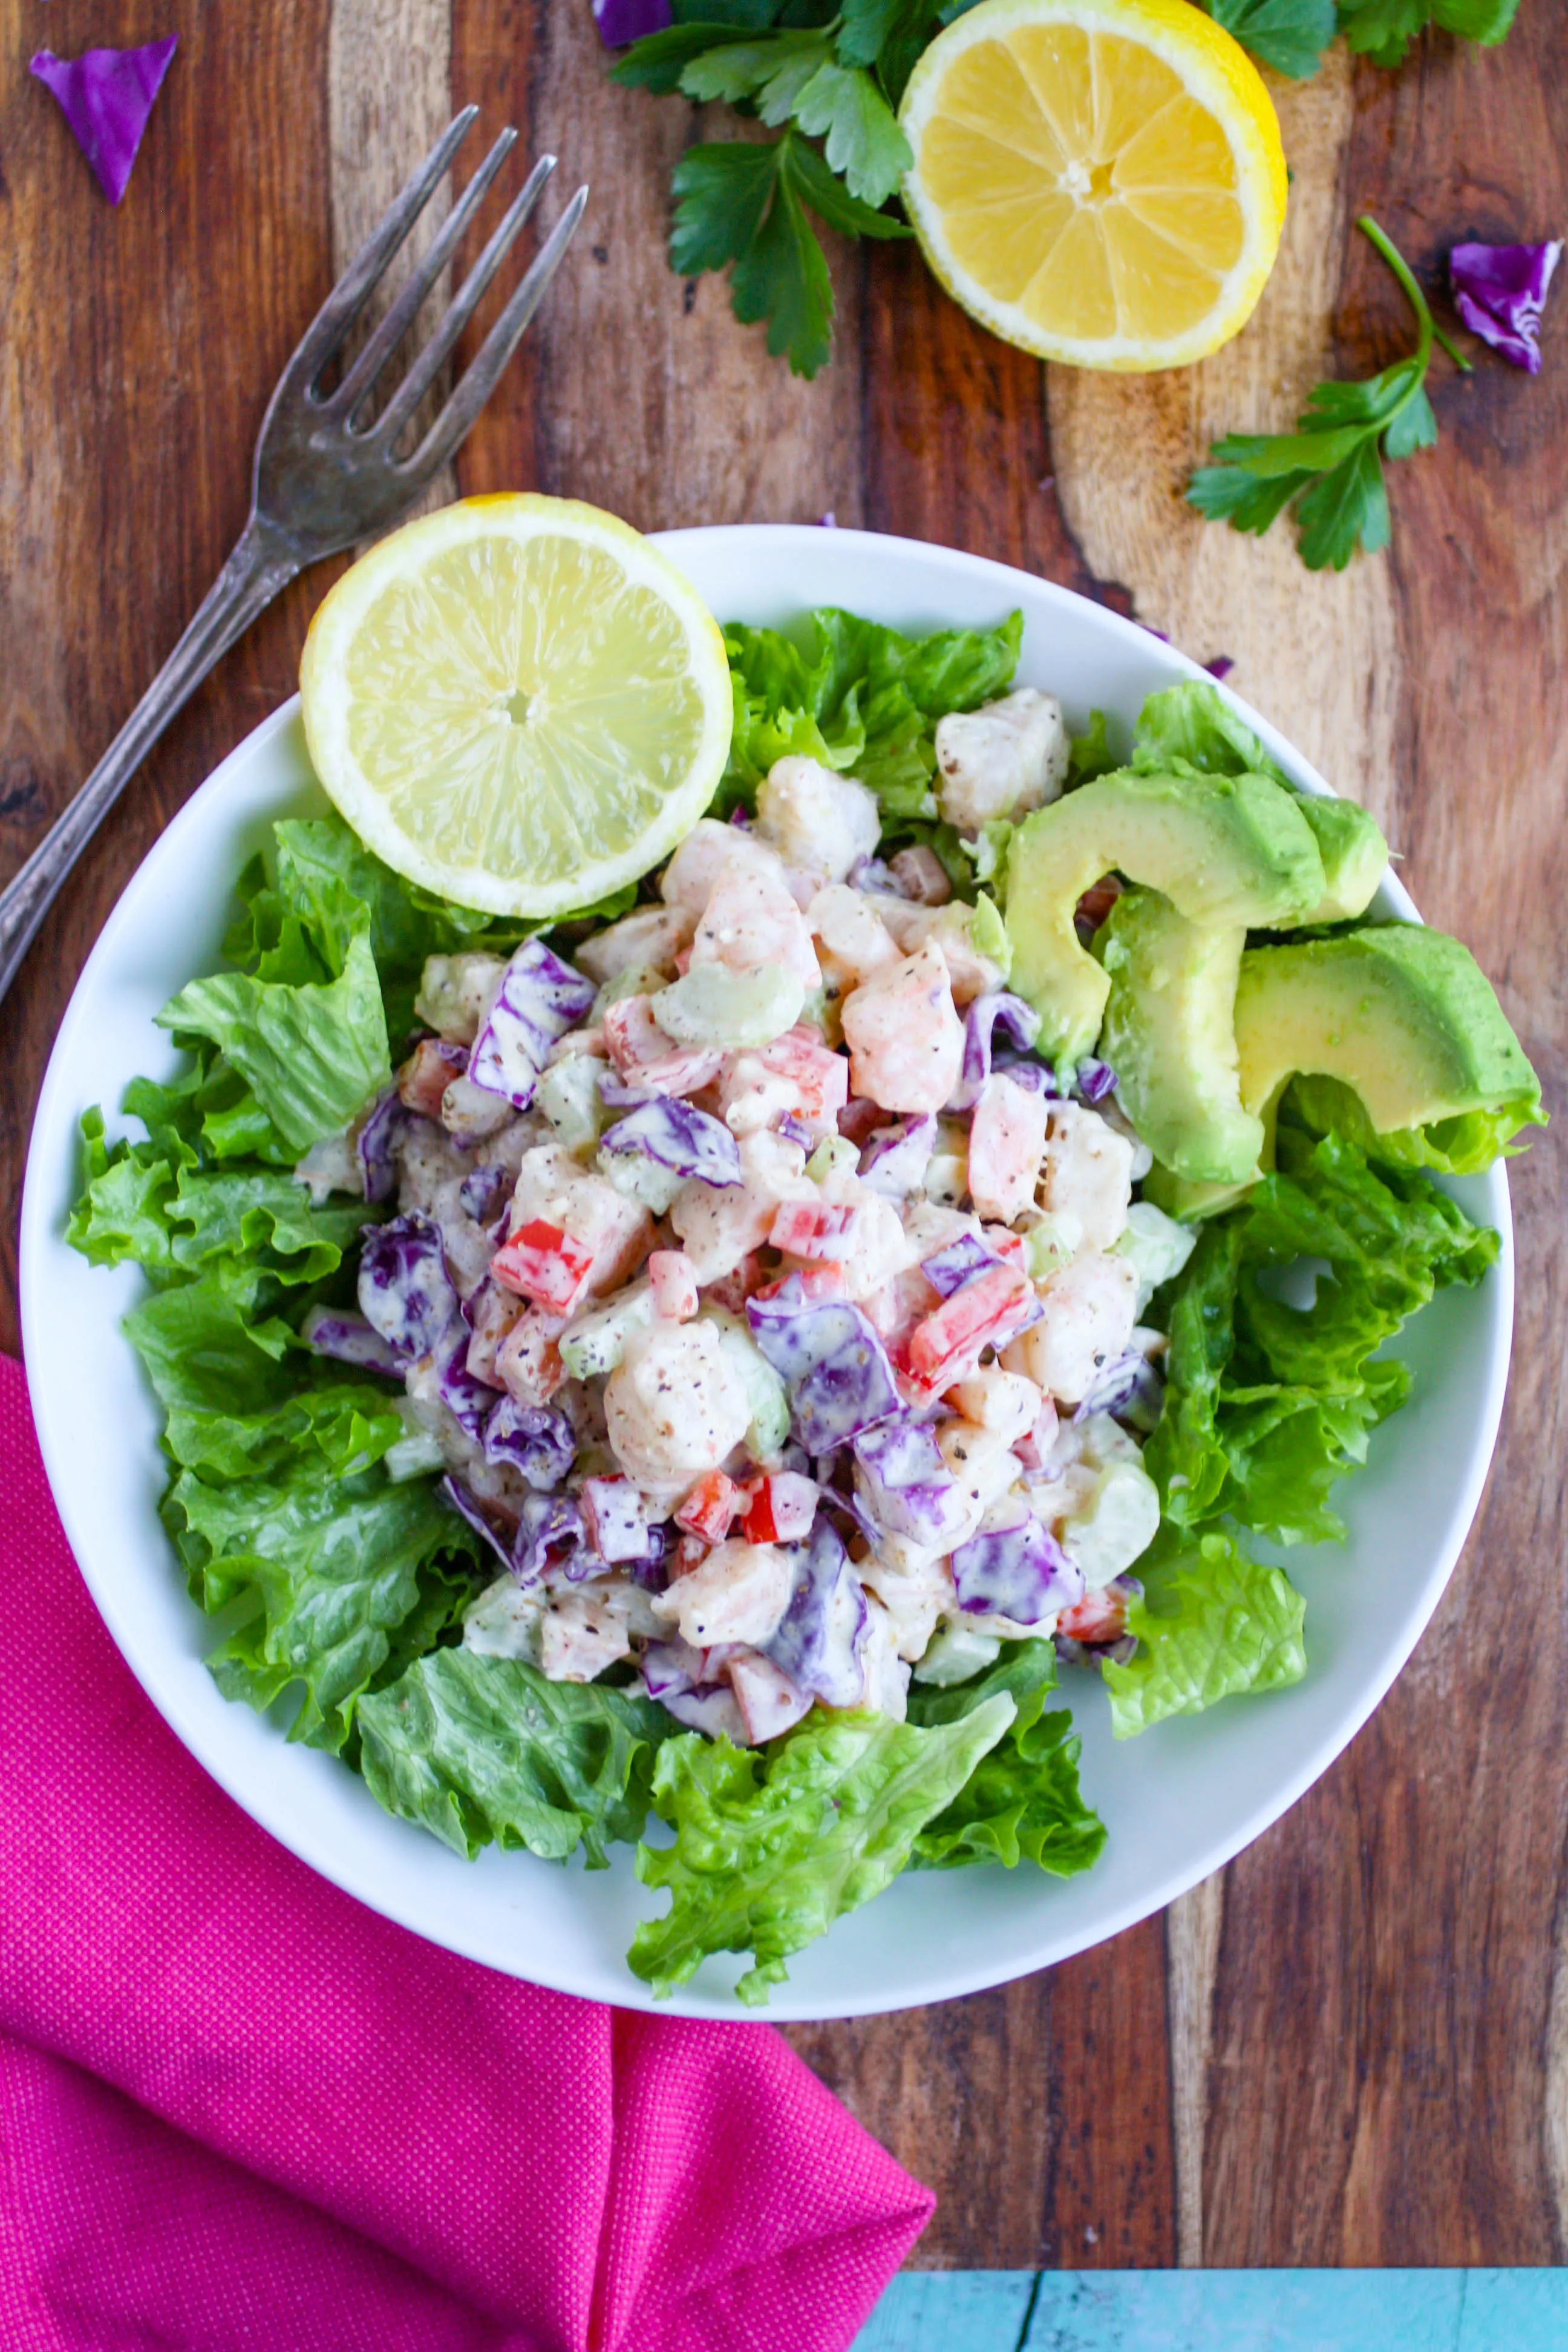 Chopped Shrimp Remoulade Salad is one you'll want to dig into! Chopped Shrimp Remoulade Salad is zesty and tasty -- you'll love it!